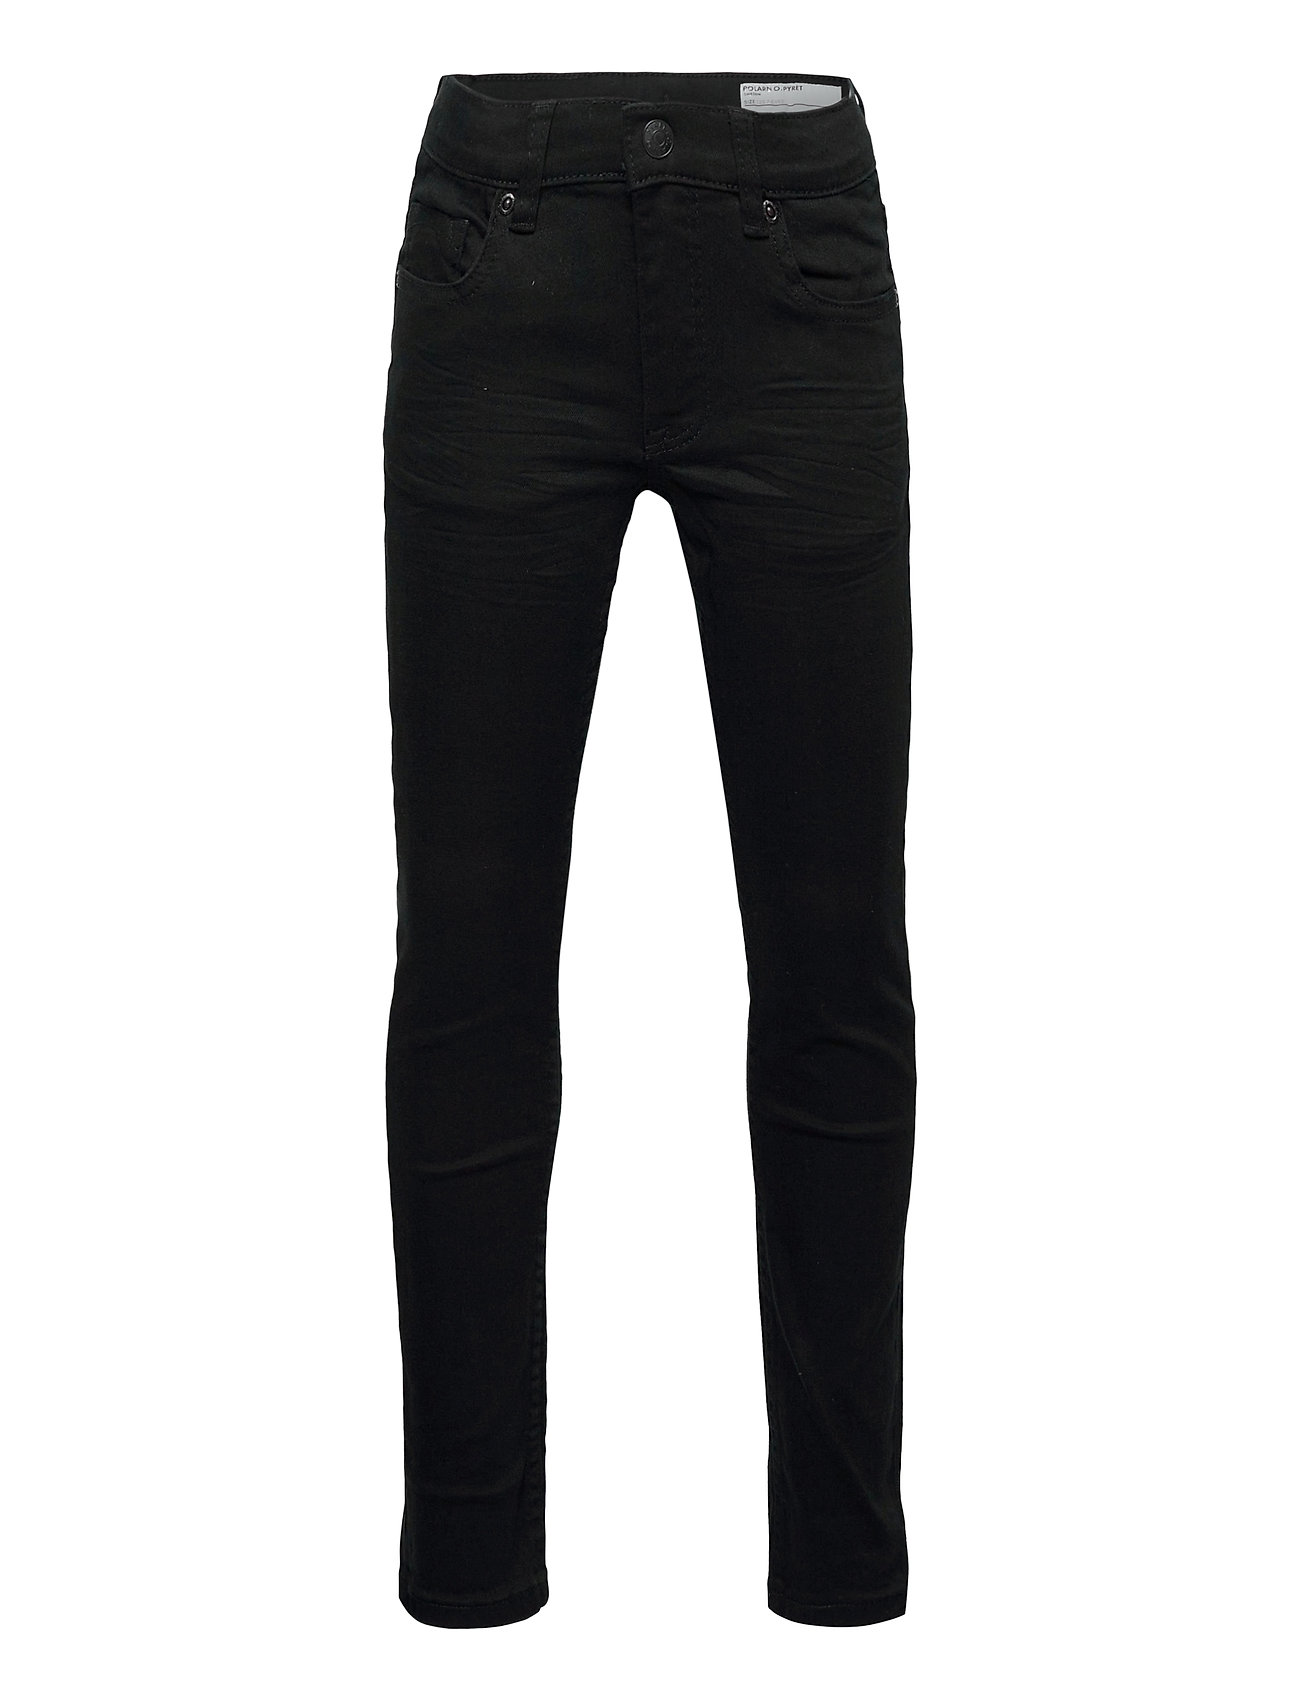 Trousers Solid School Jeans Sort Polarn O. Pyret